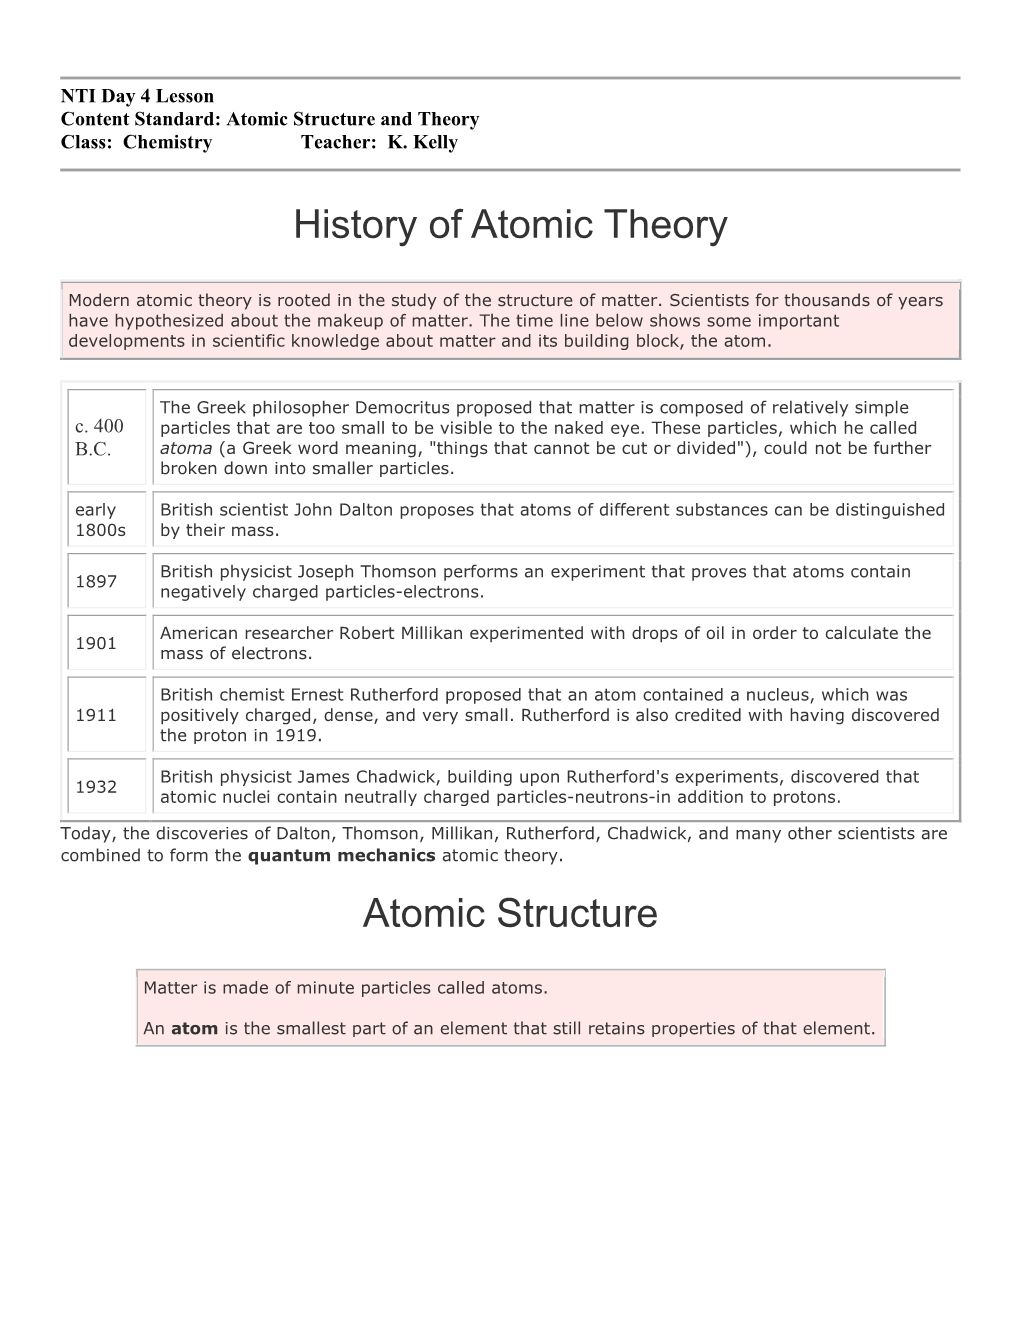 History of Atomic Theory Atomic Structure